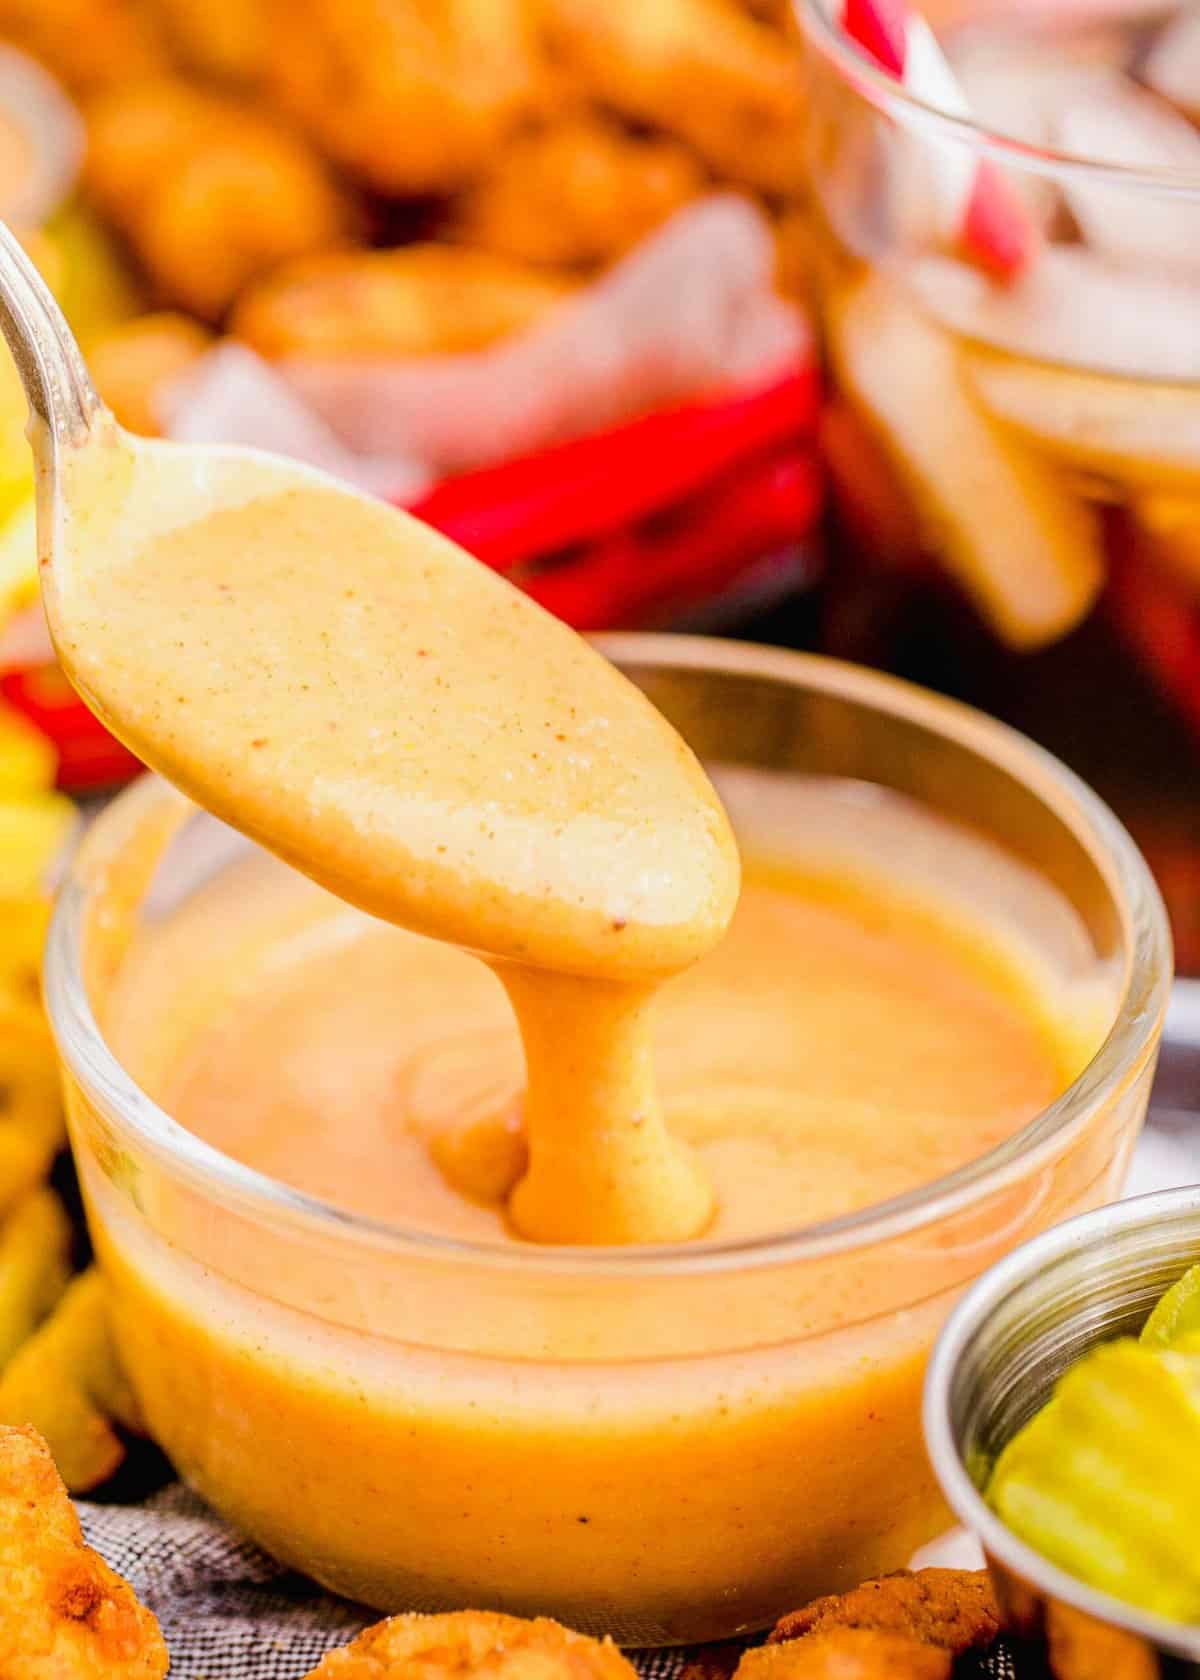 Spoonful of Chick-Fil-A sauce dripping into small glass bowl of sauce